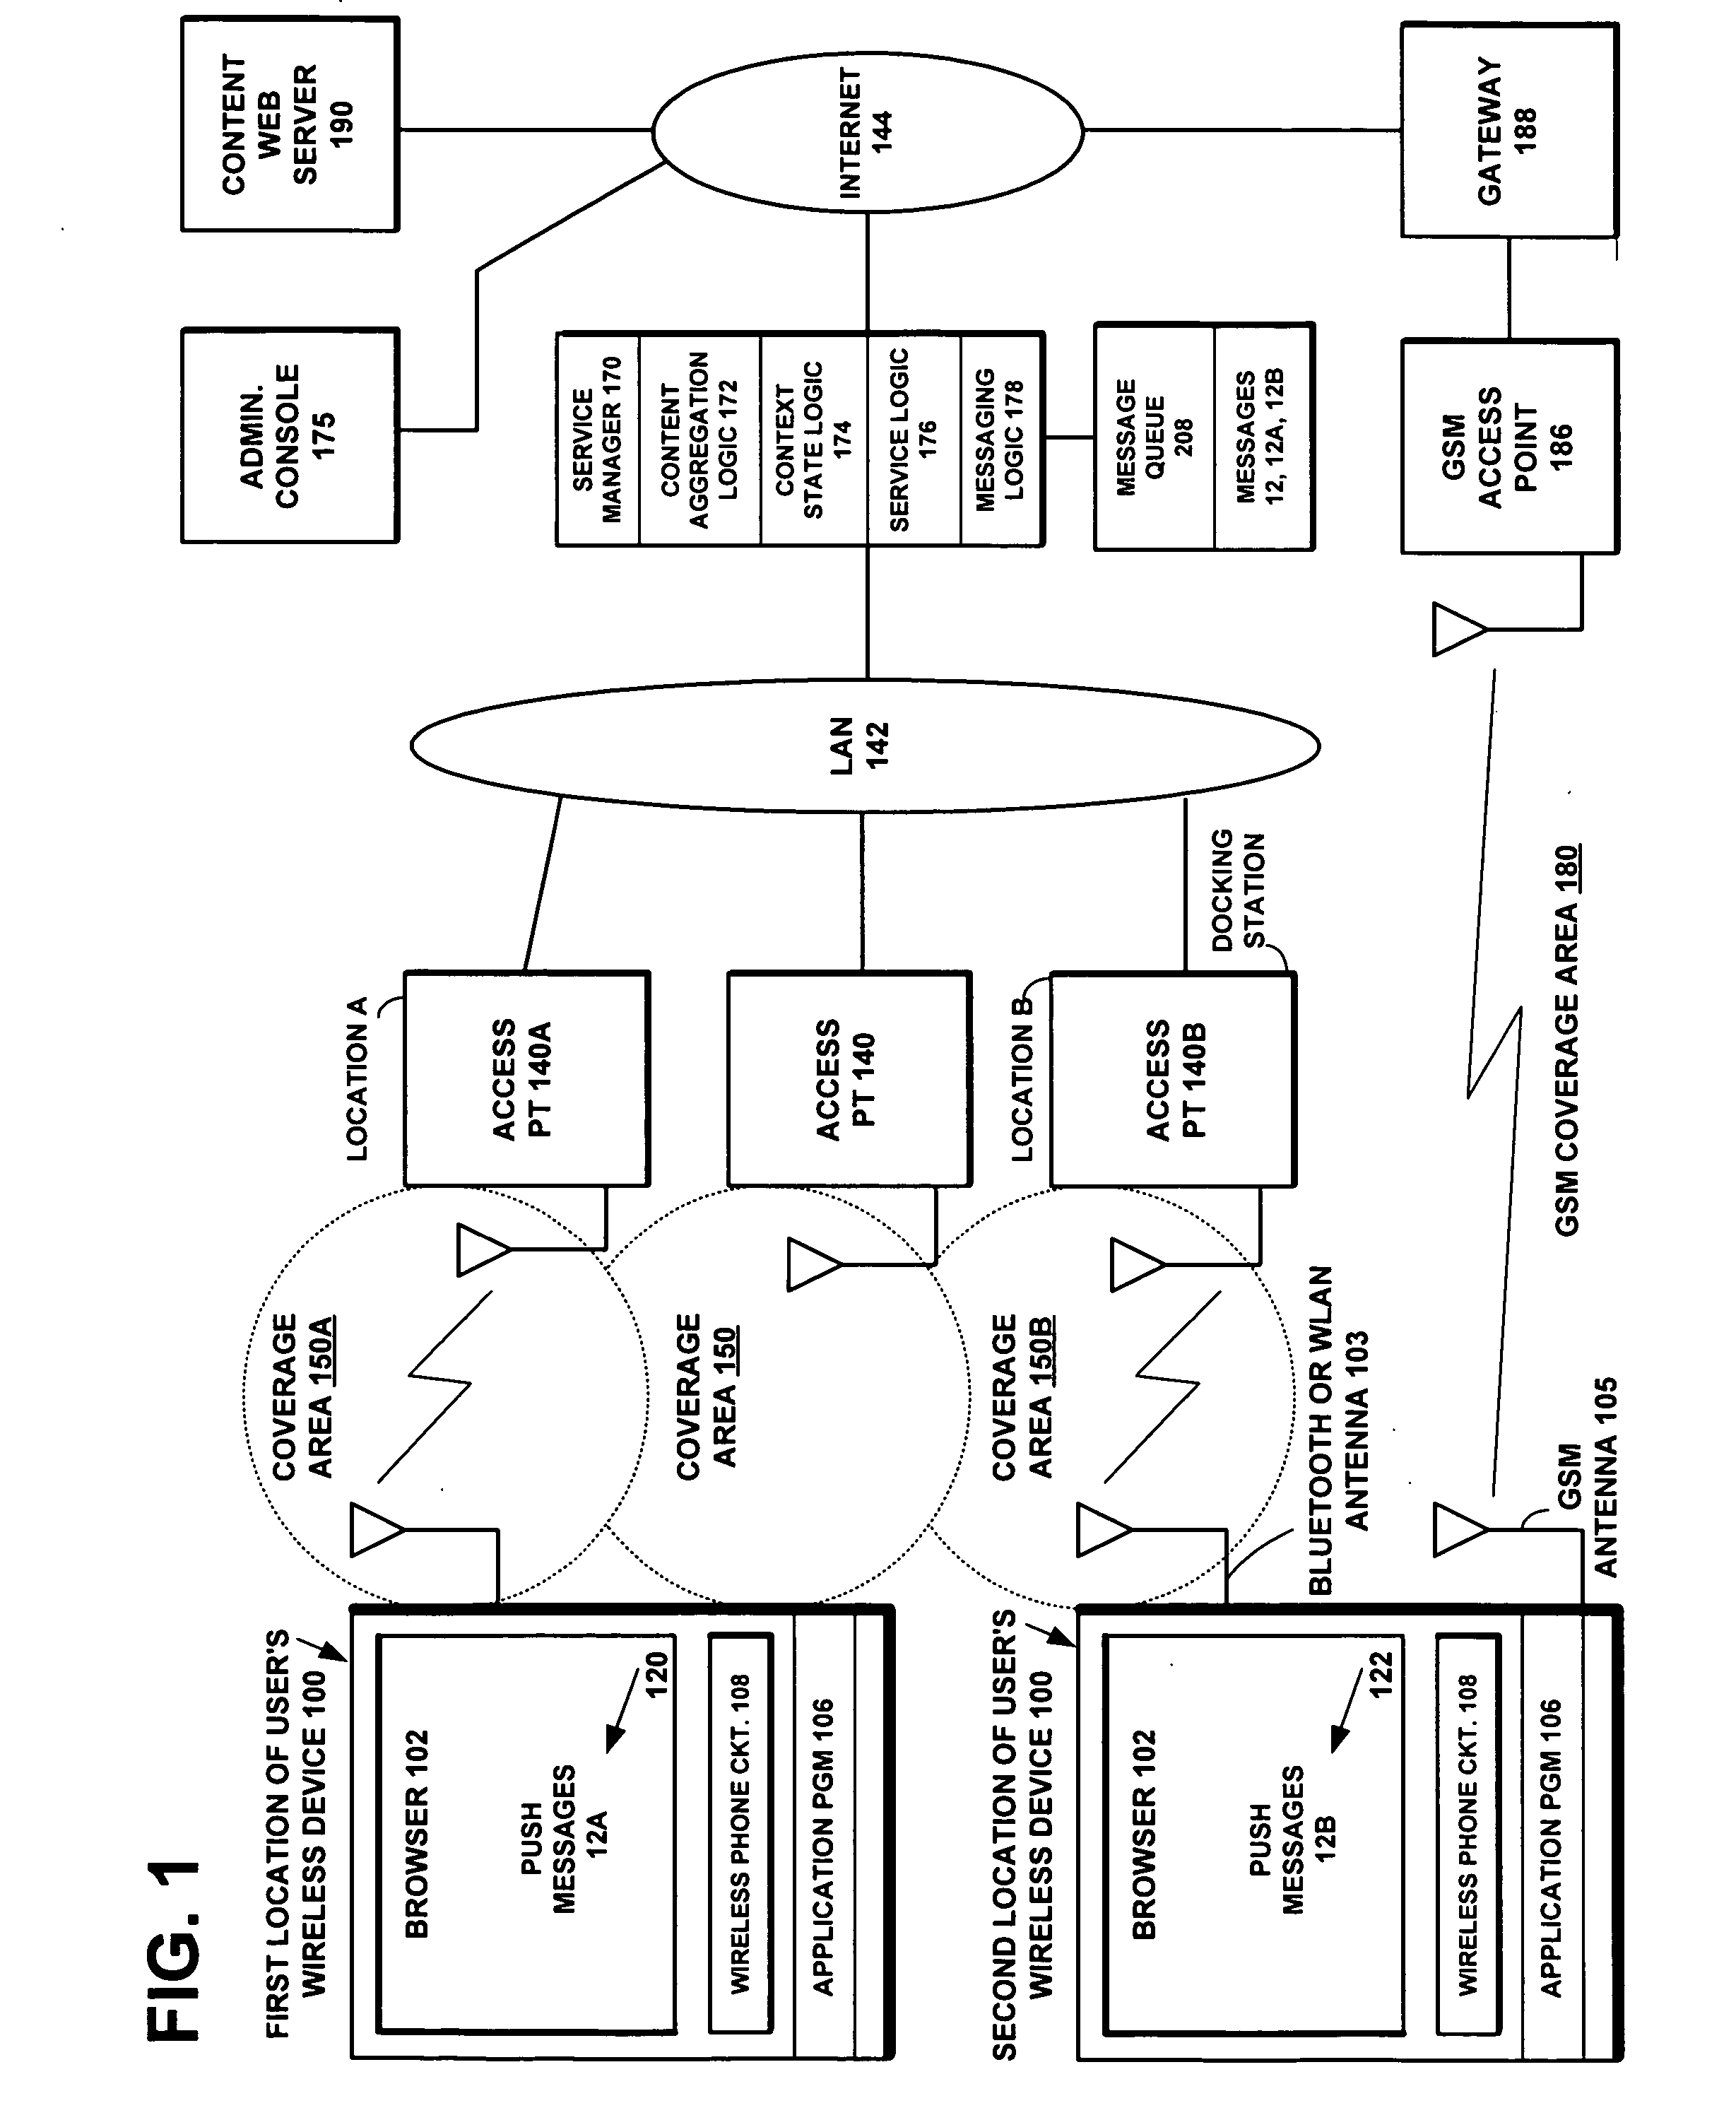 Method and system for controlling contextual information push services